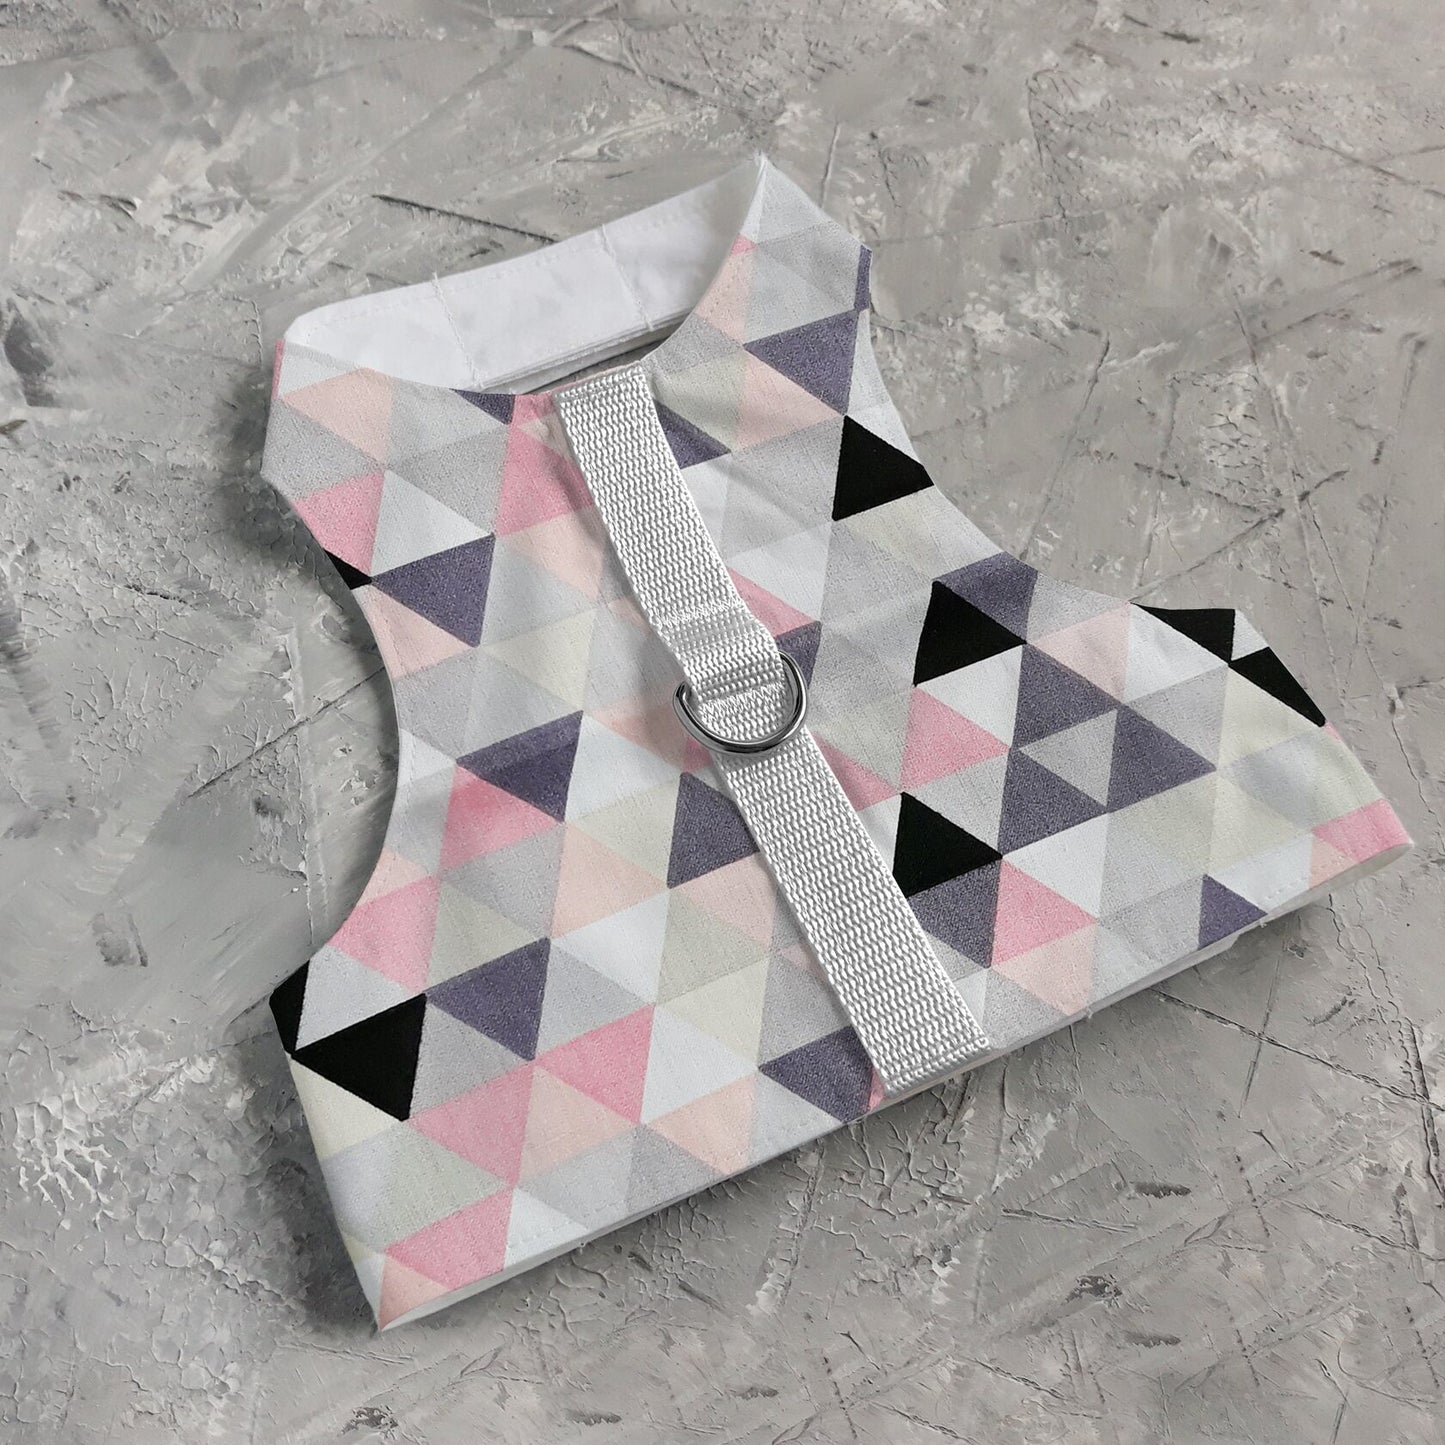 Difficult to escape and safety cat harness. Breathable cotton vest with pink triangles print